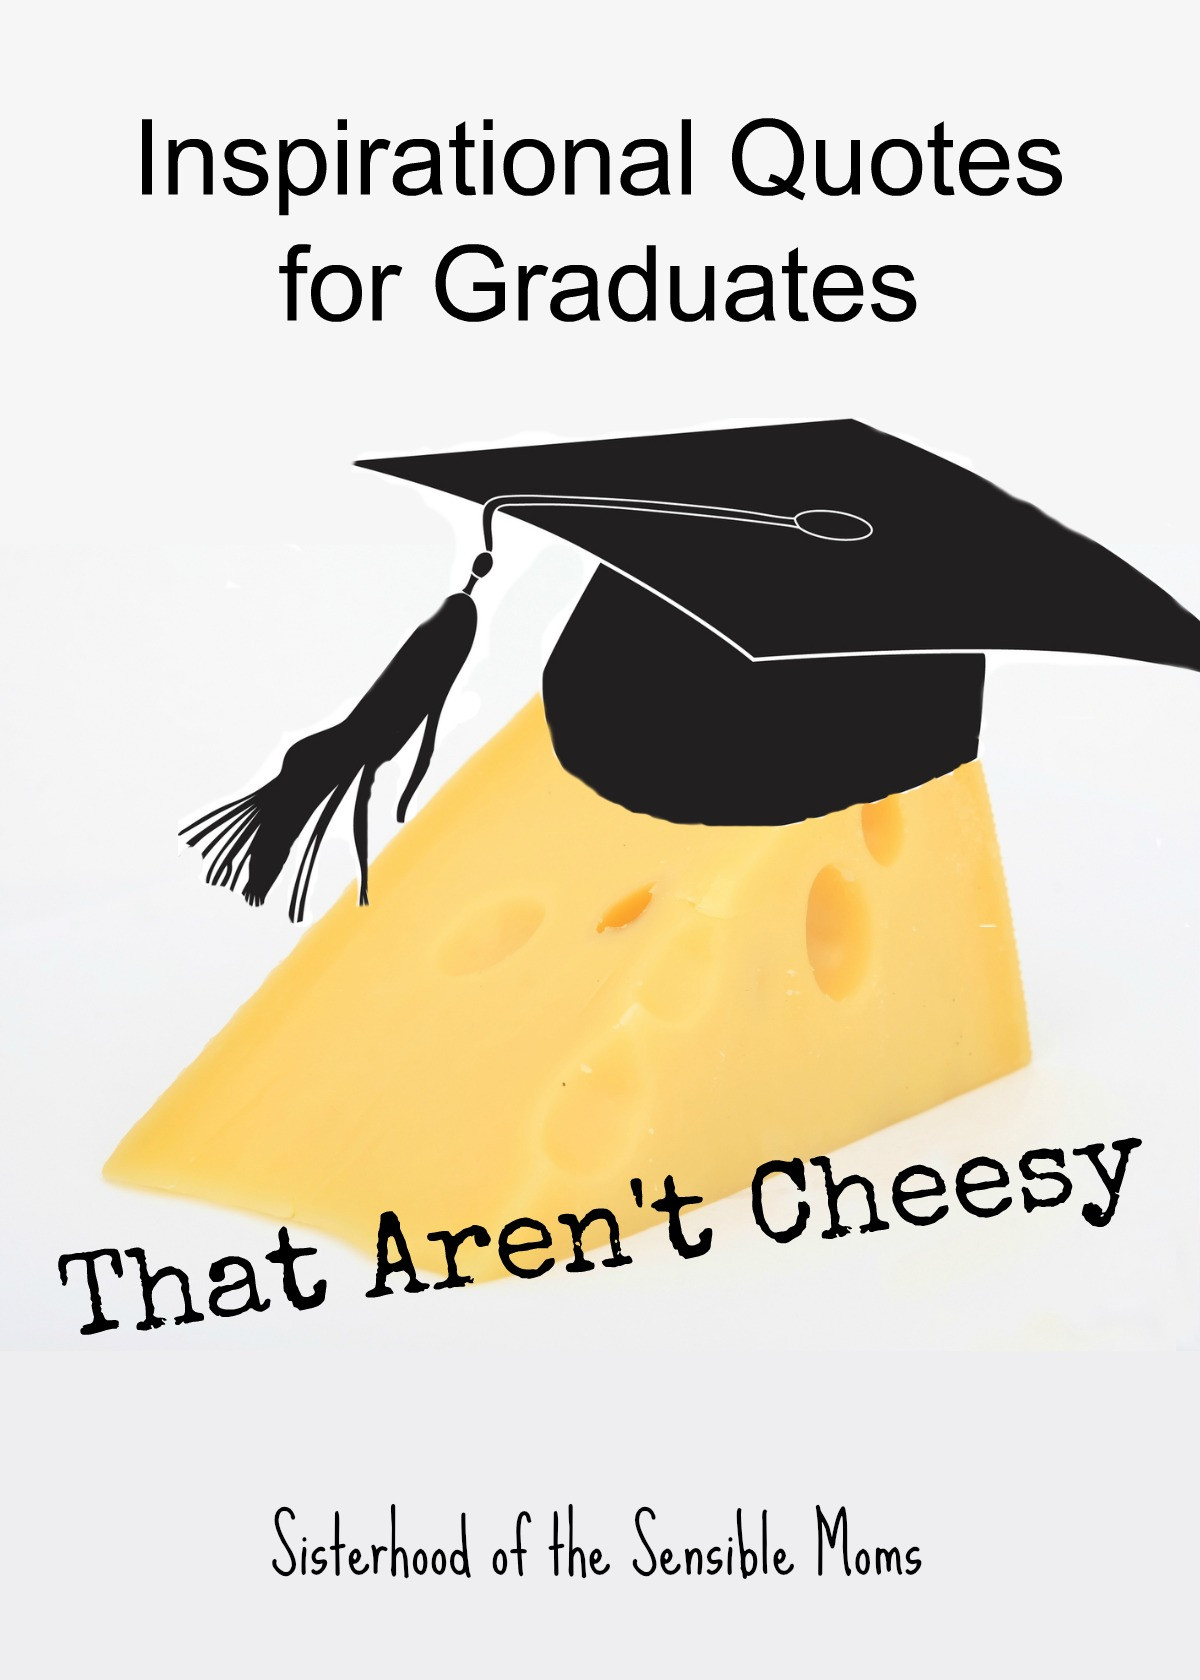 Quote For Graduation Speech
 Inspirational Quotes for Graduates That Aren t Cheesy